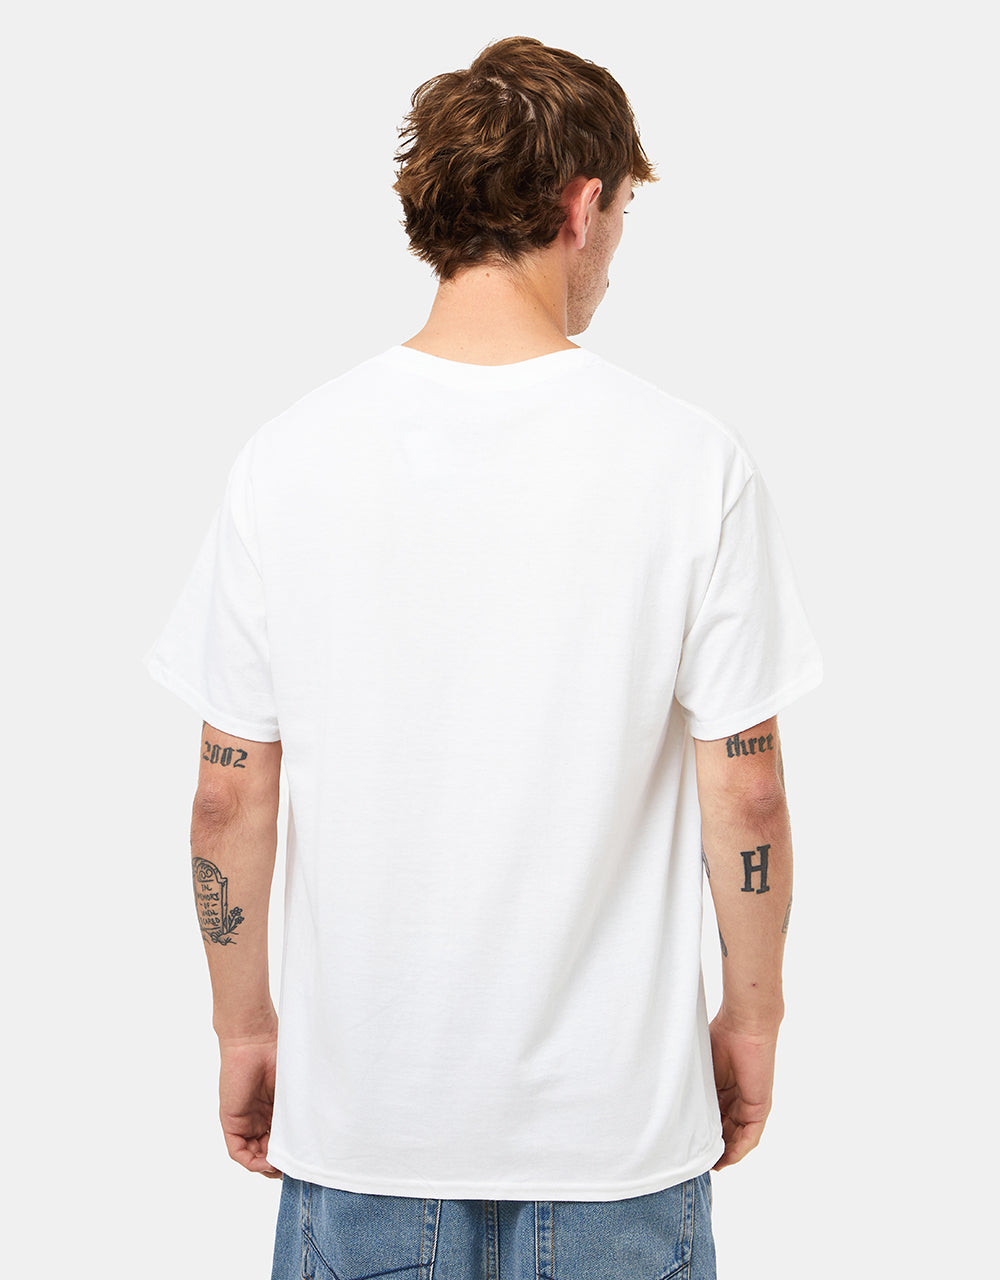 Route One Love It T-Shirt - White